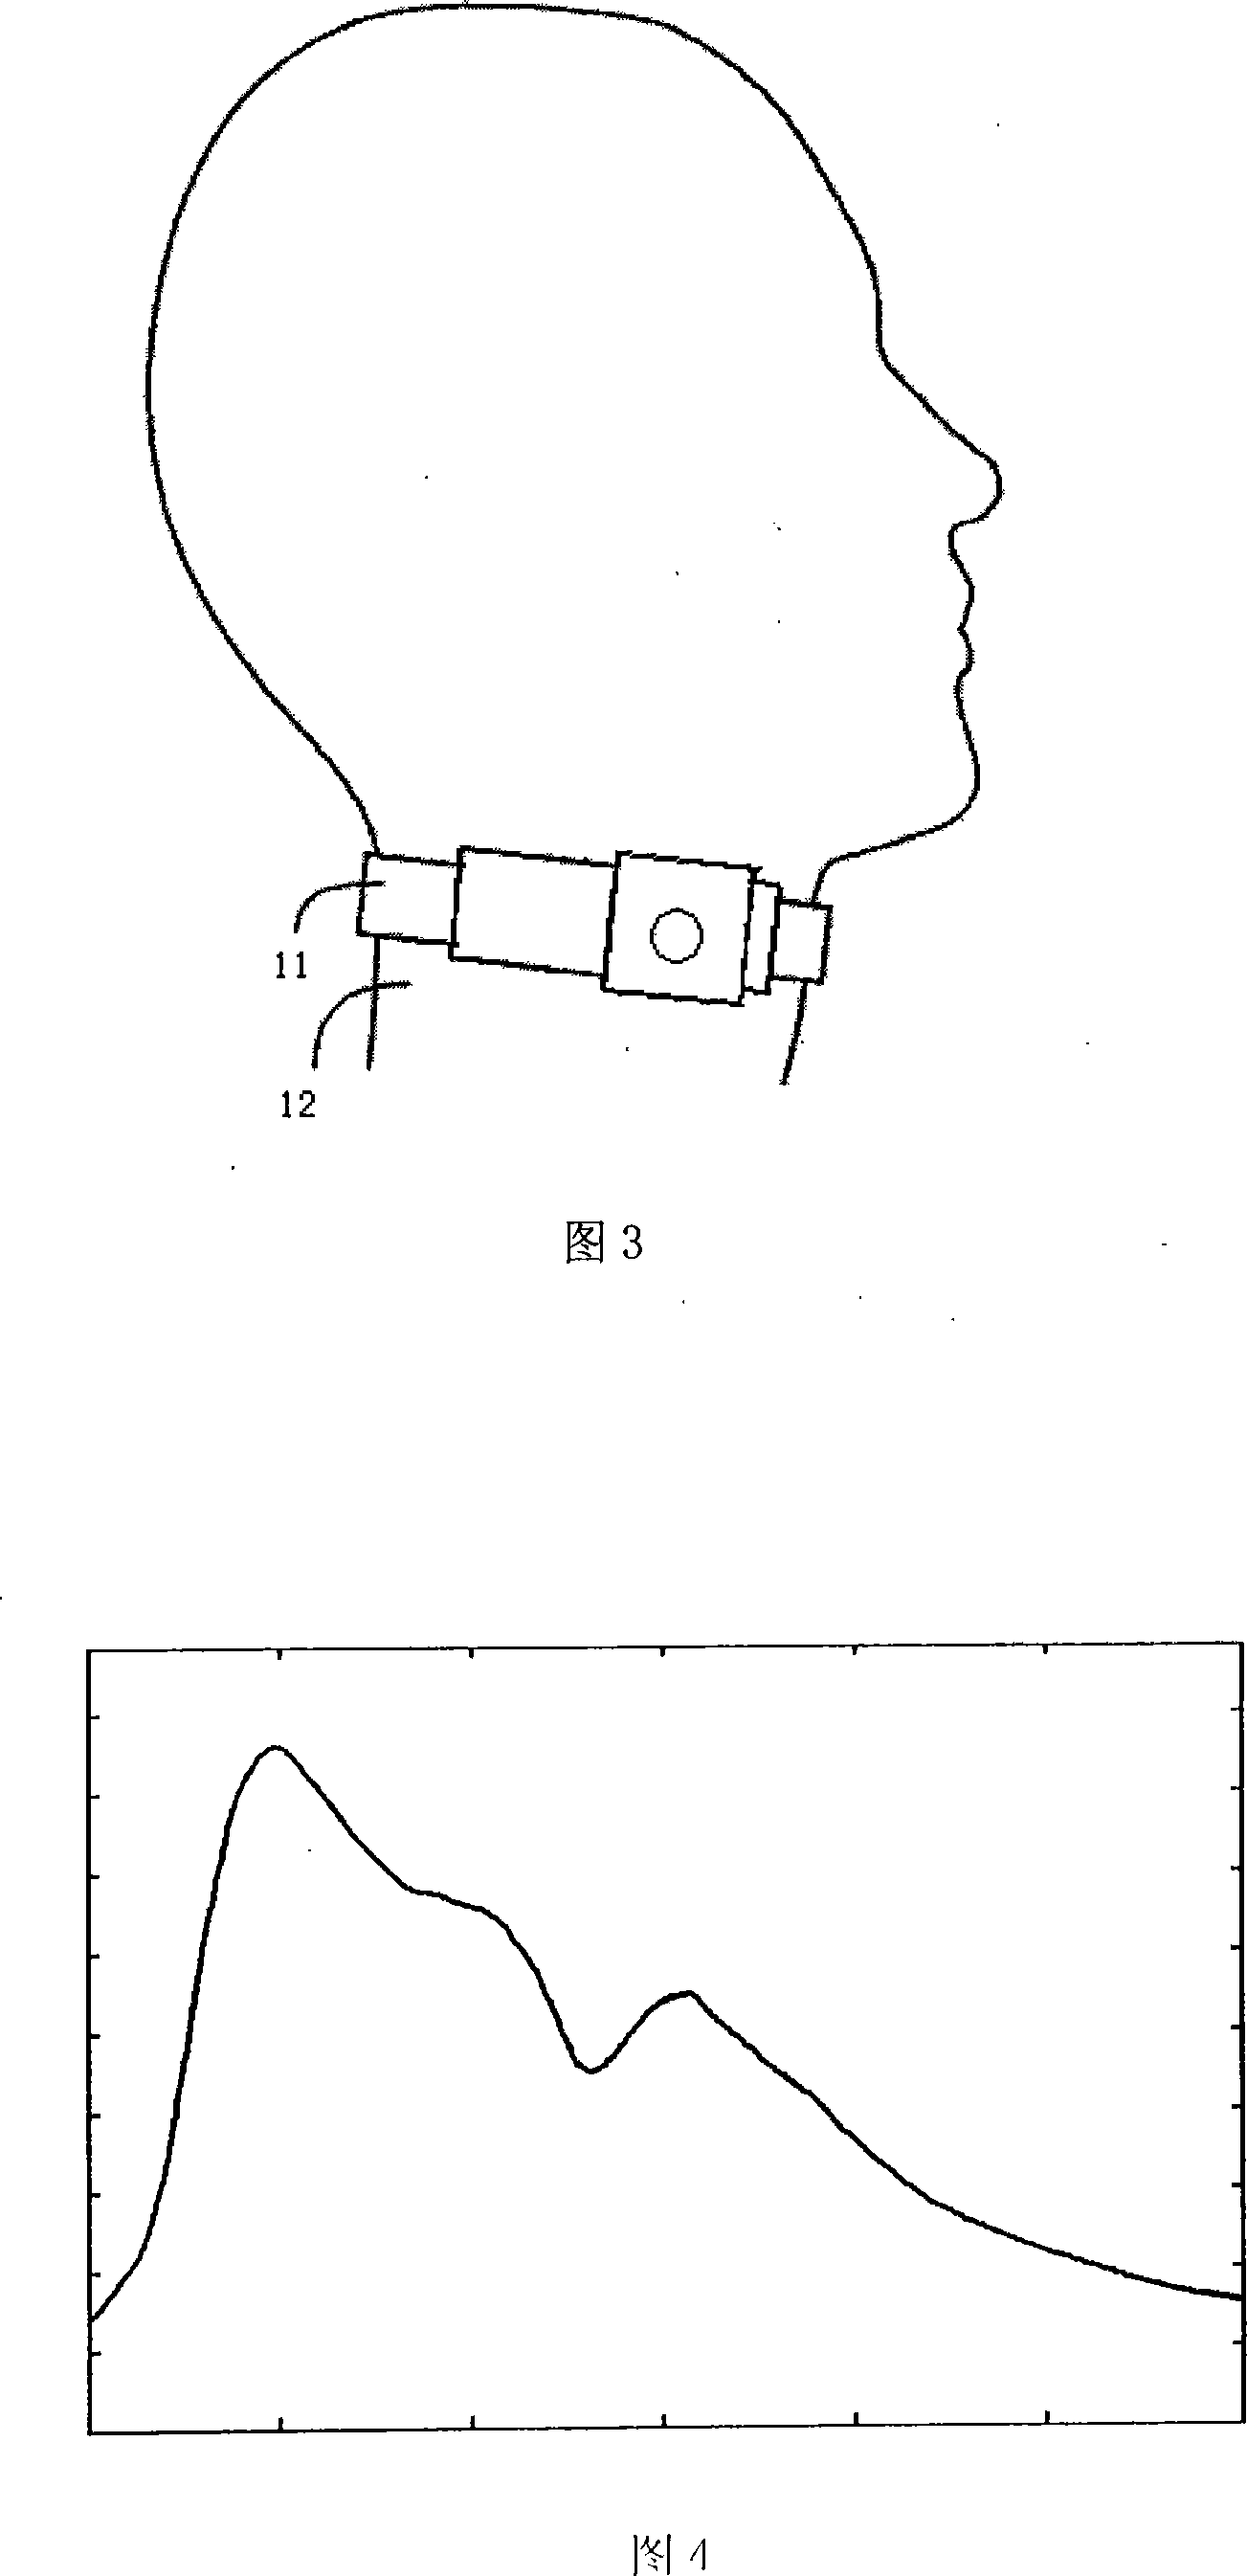 Non-invasive cardiac output detecting methods and apparatus based on sphygmus wave